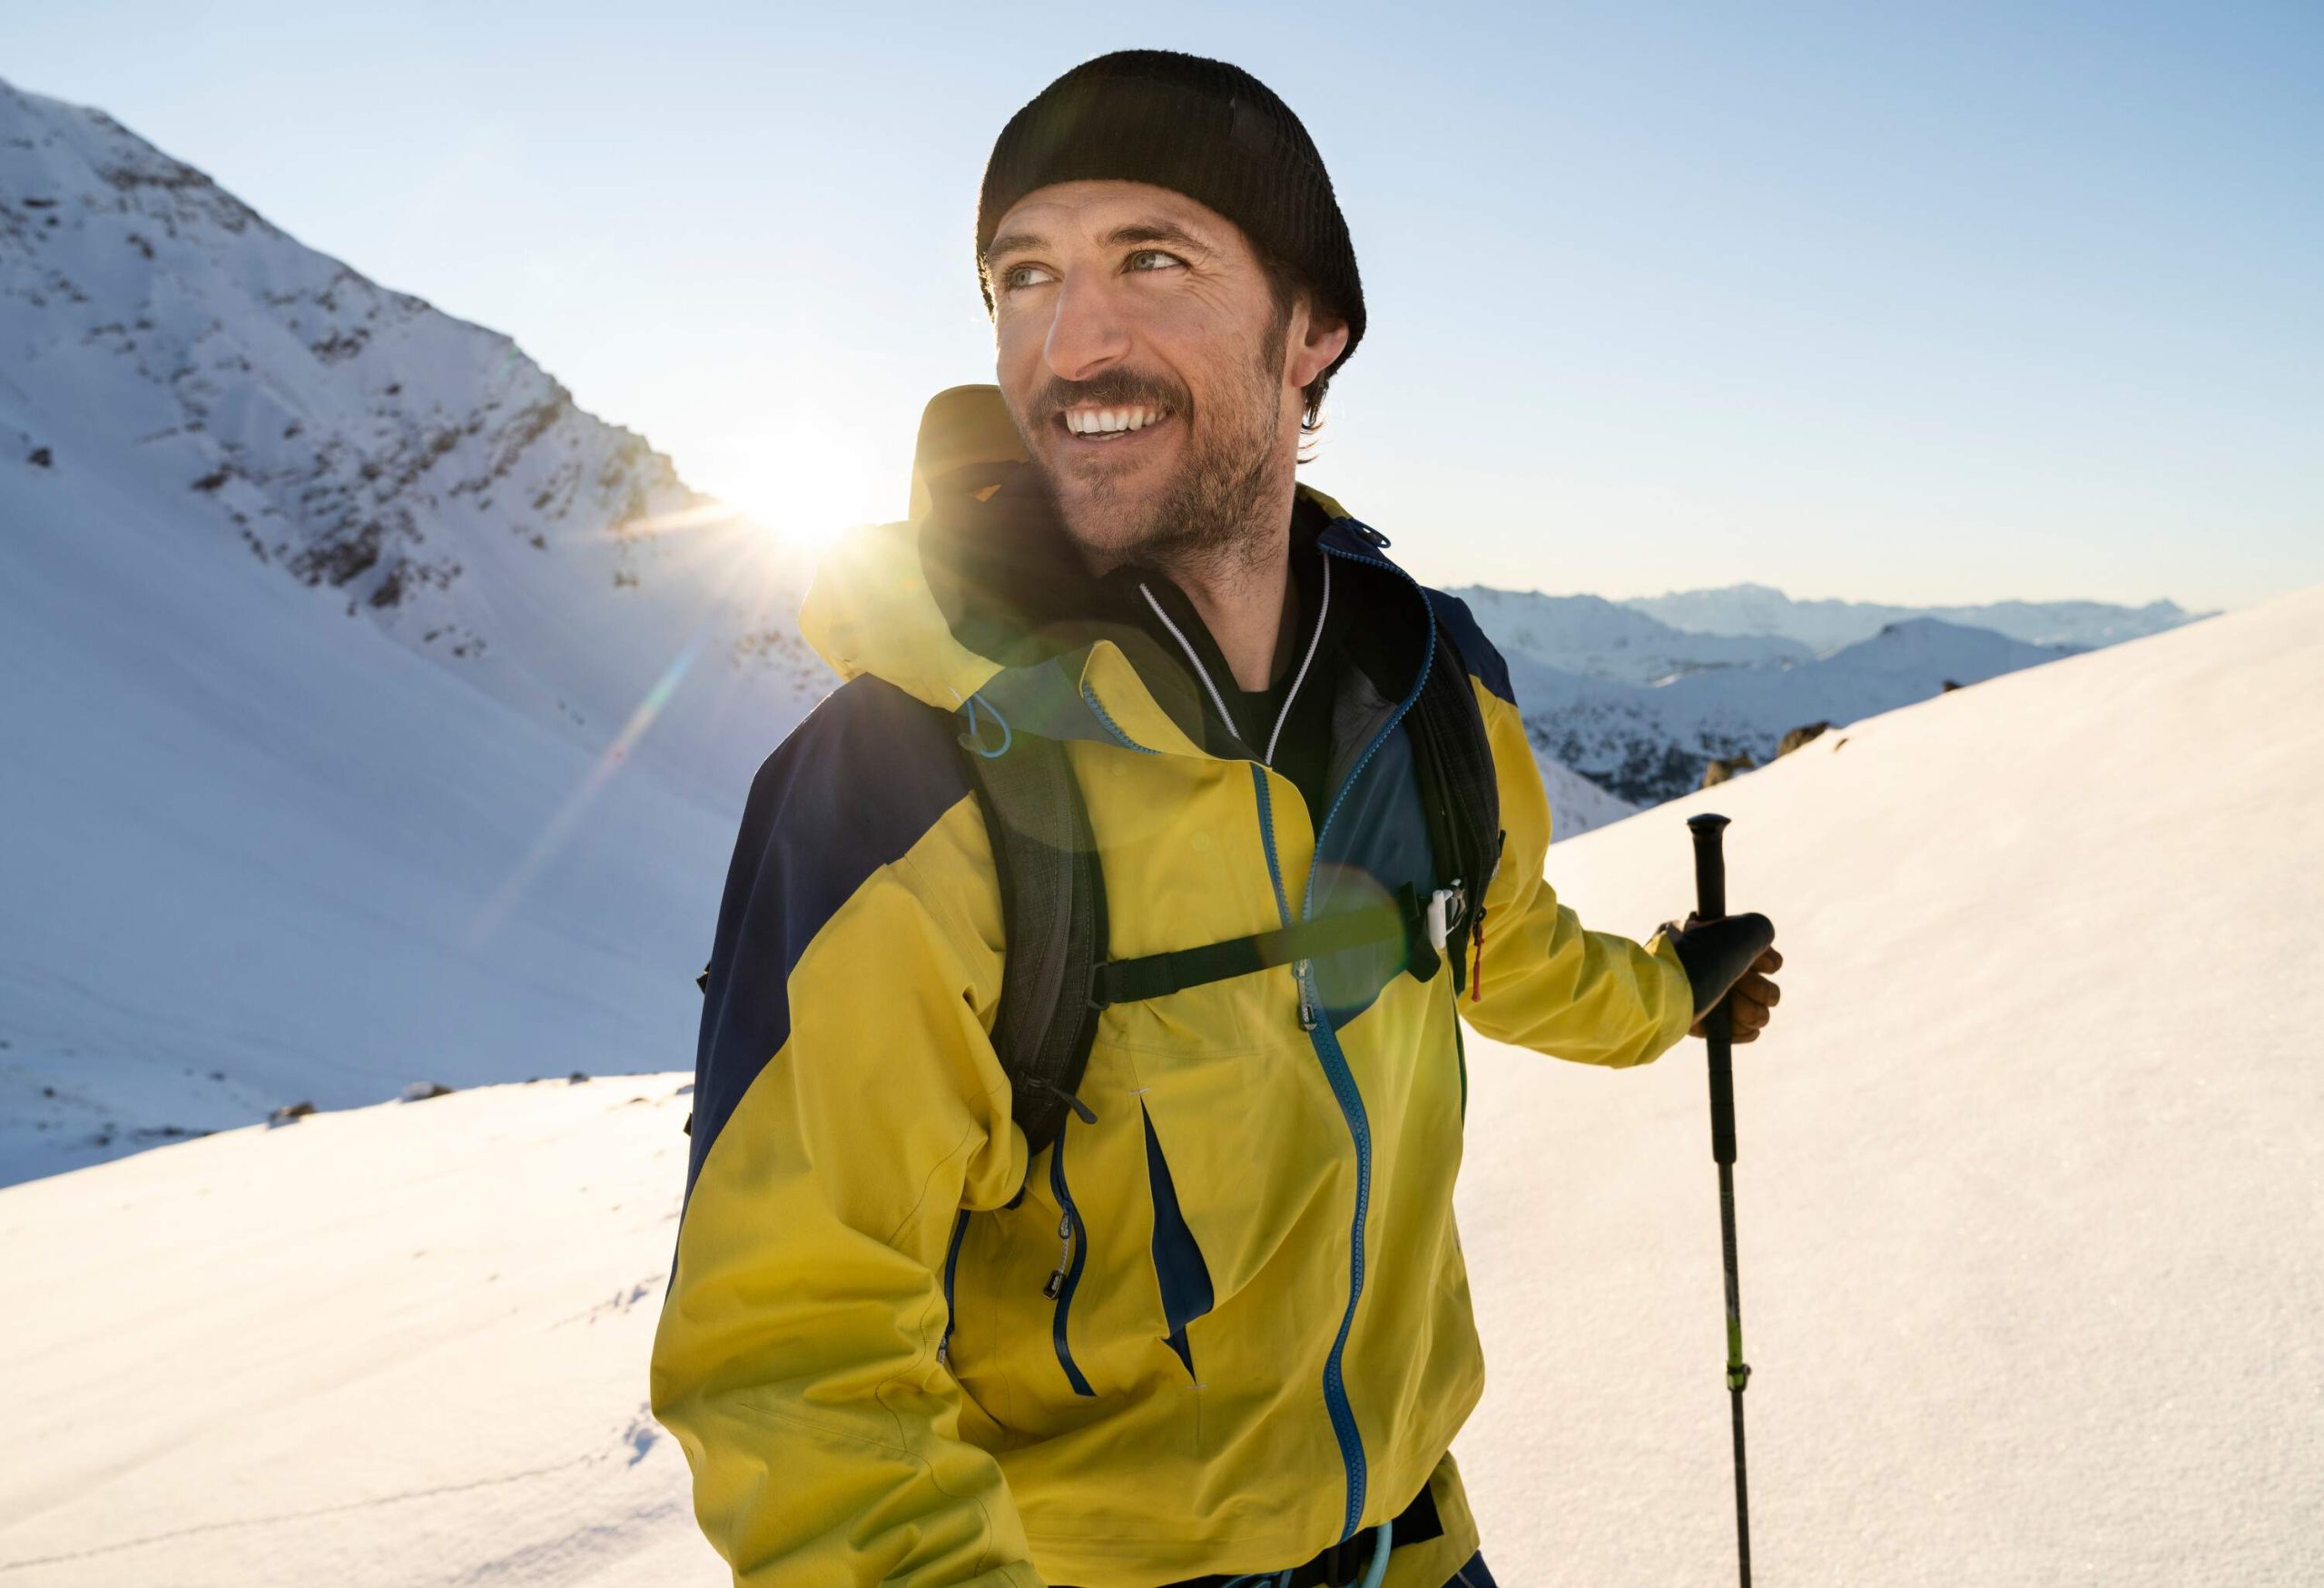 The sun shines behind a smiling man in a yellow jacket holding a ski pole.